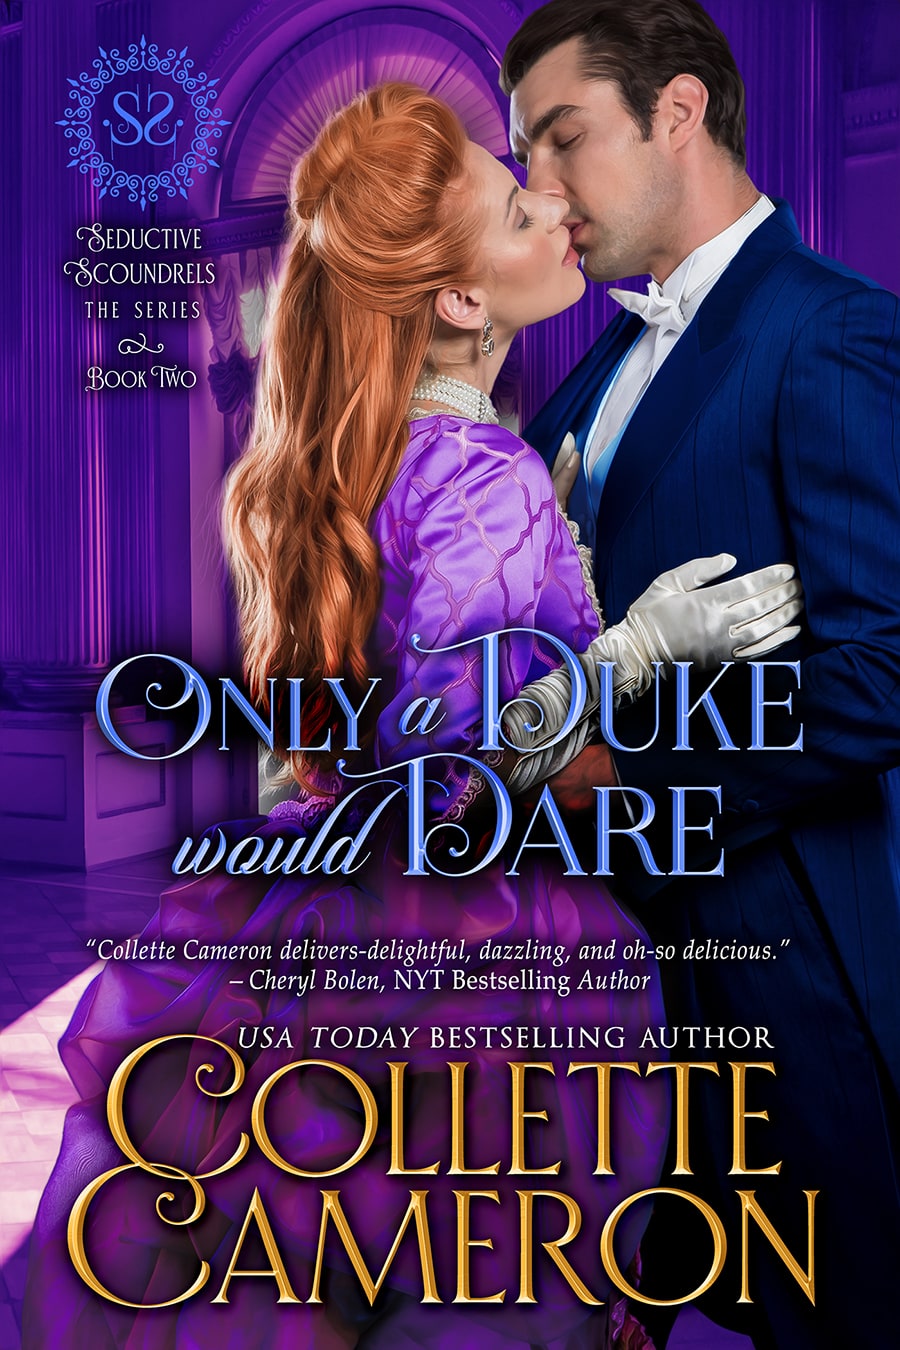 Only a Duke Would Dare, Seductive Scoundrel's Series, Historical regency romance books, historical Scottish romances, historical Scottish romance books, Historical Regency romances, Collette Cameron Historical regency Romances, Collette Cameron Historical regency romance books, Collette Cameron Scottish Romances, Collette Cameron Highlander romances, wallflower historical Scottish romances, wounded hero historical regency romances, lord ladies in love historical regency romances, bestselling historical regency romances, best historical regency authors, Regency England Dukes, Regency England betrothals weddings, USA Today Bestselling Author Collette Cameron, Collette Cameron historical romances, Collette Cameron Regency romances, Collette Cameron romance novels, Collette Cameron Scottish historical romance books, Blue Rose Romance, Bestselling historical romance authors, historical romance novels, Regency romance novels, Highlander romance books, Scottish romance novels, romance novel covers, Bestselling romance novels, Bestselling Regency romances, Bestselling Scottish Romances, Bestselling Highlander romances, Victorian Romances, lords and ladies romance novels, Regency England Dukes romance books, aristocrats and royalty, happily ever after novels, love stories, wallflowers, rakes and rogues, award-winning books, Award-winning author, historical romance audio books, collettecameron.com, The Regency Rose Newsletter, Sweet-to-Spicy Timeless Romance, historical romance meme, romance meme, historical regency romance 